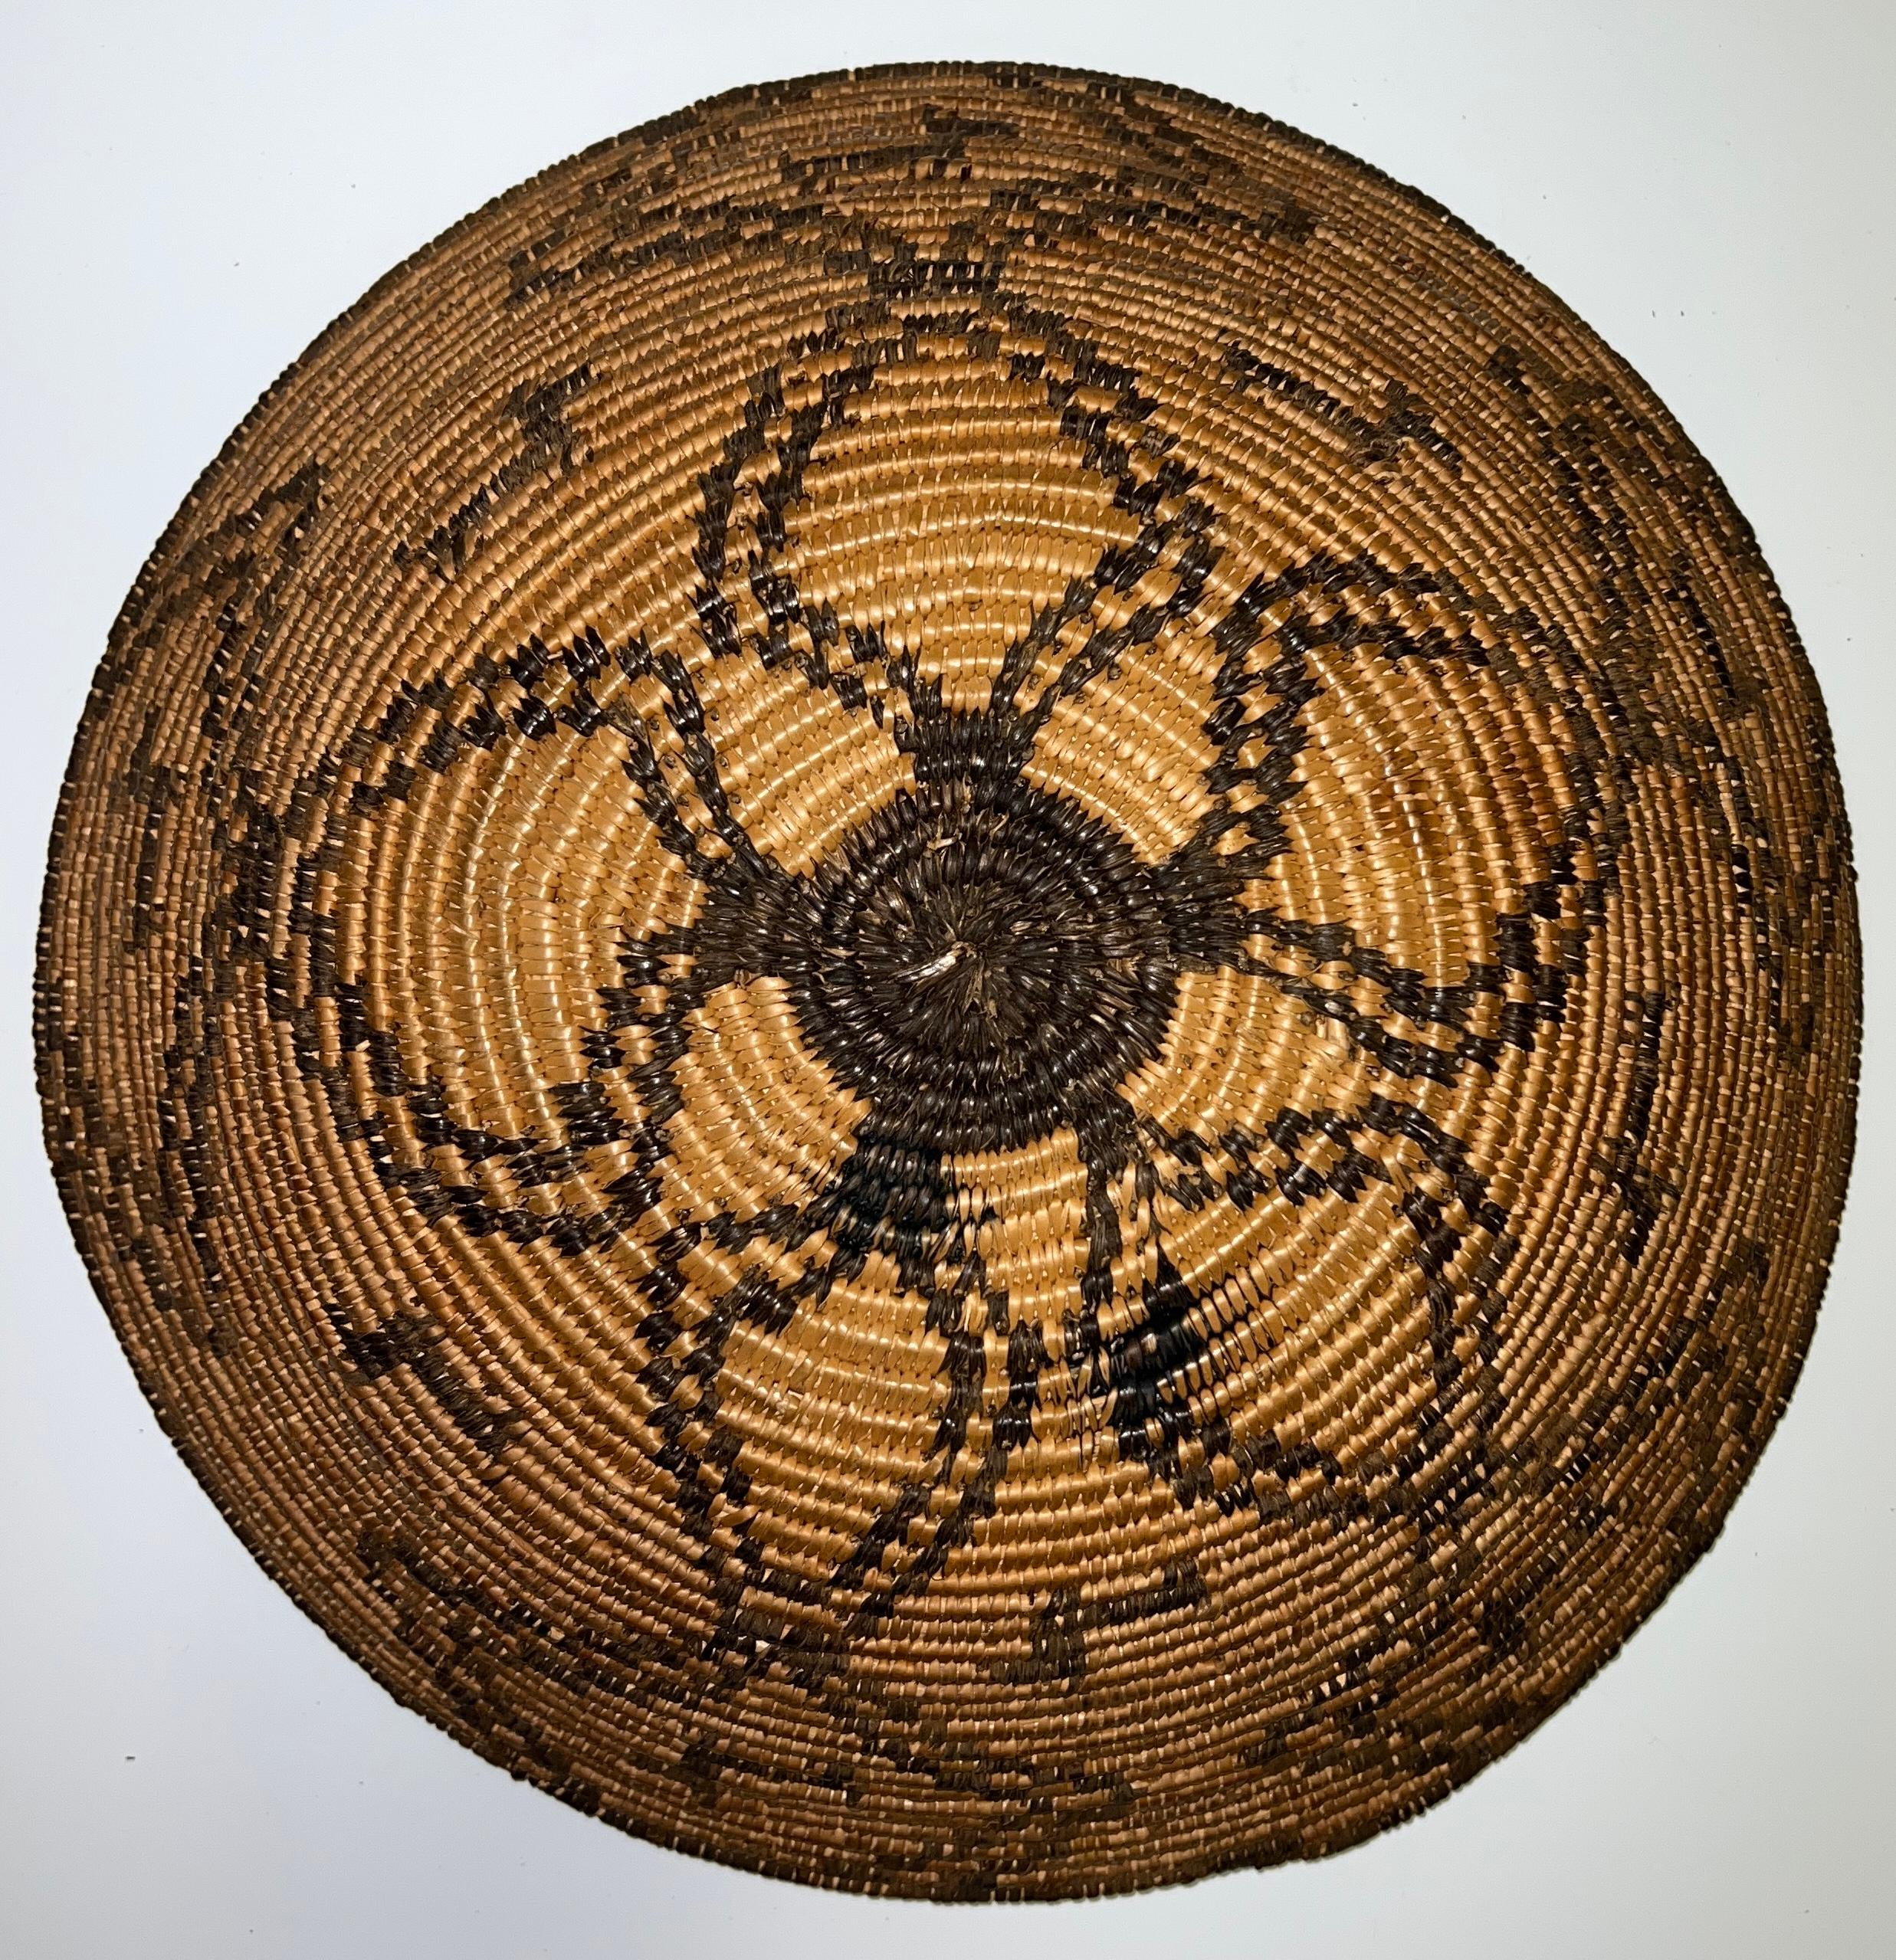 Woven Apache Basket with Dog Motif - Other Art Style Art by Unknown